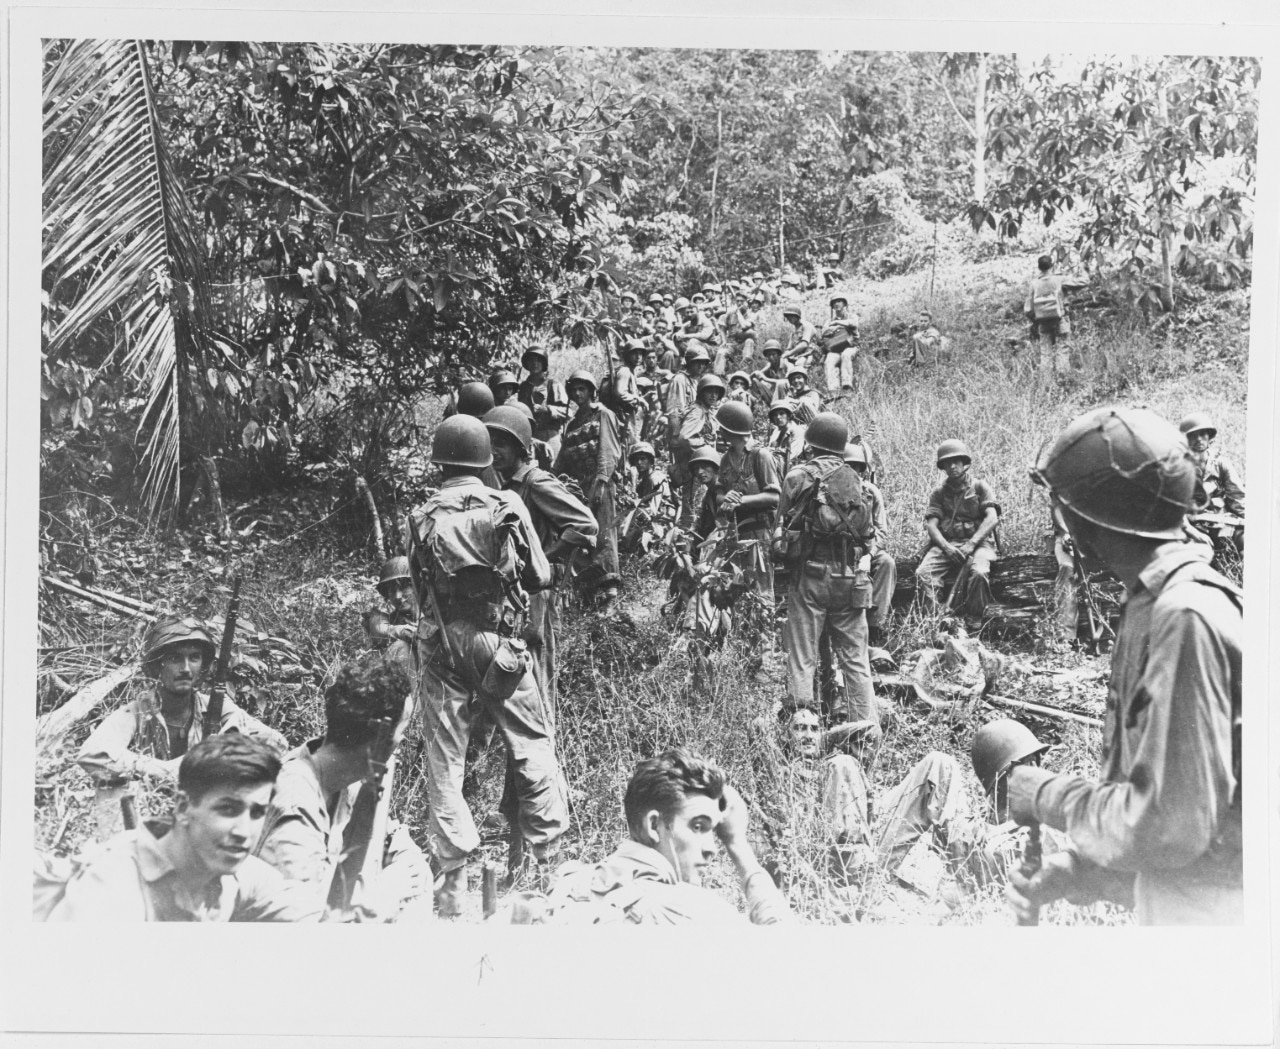 Dozens of men in combat gear walk along a jungle path. Some rest in the nearby brush.